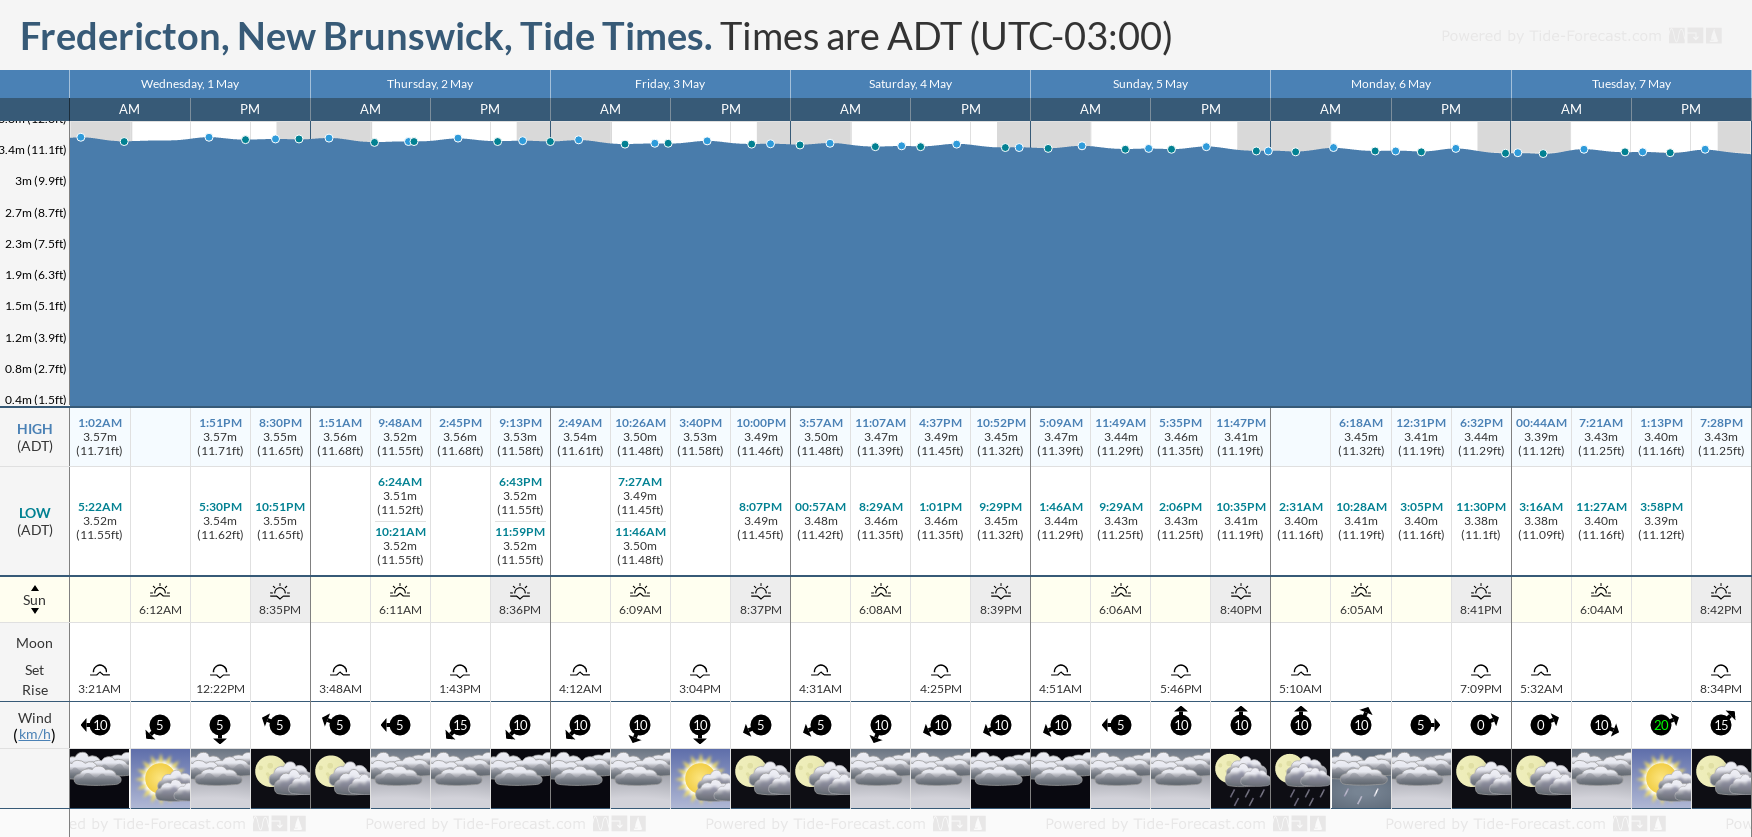 Fredericton, New Brunswick Tide Chart including high and low tide tide times for the next 7 days